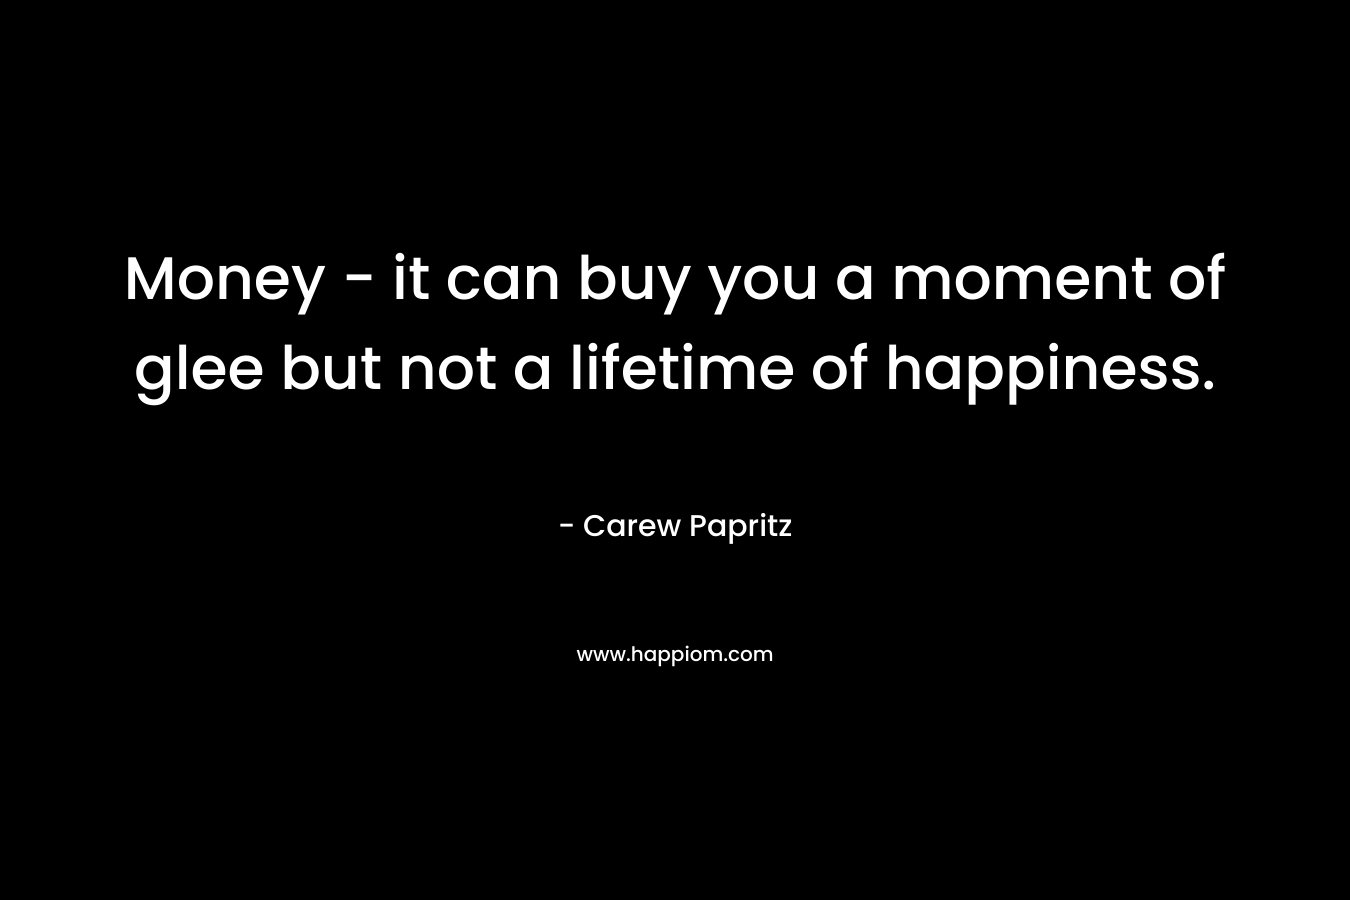 Money – it can buy you a moment of glee but not a lifetime of happiness. – Carew Papritz